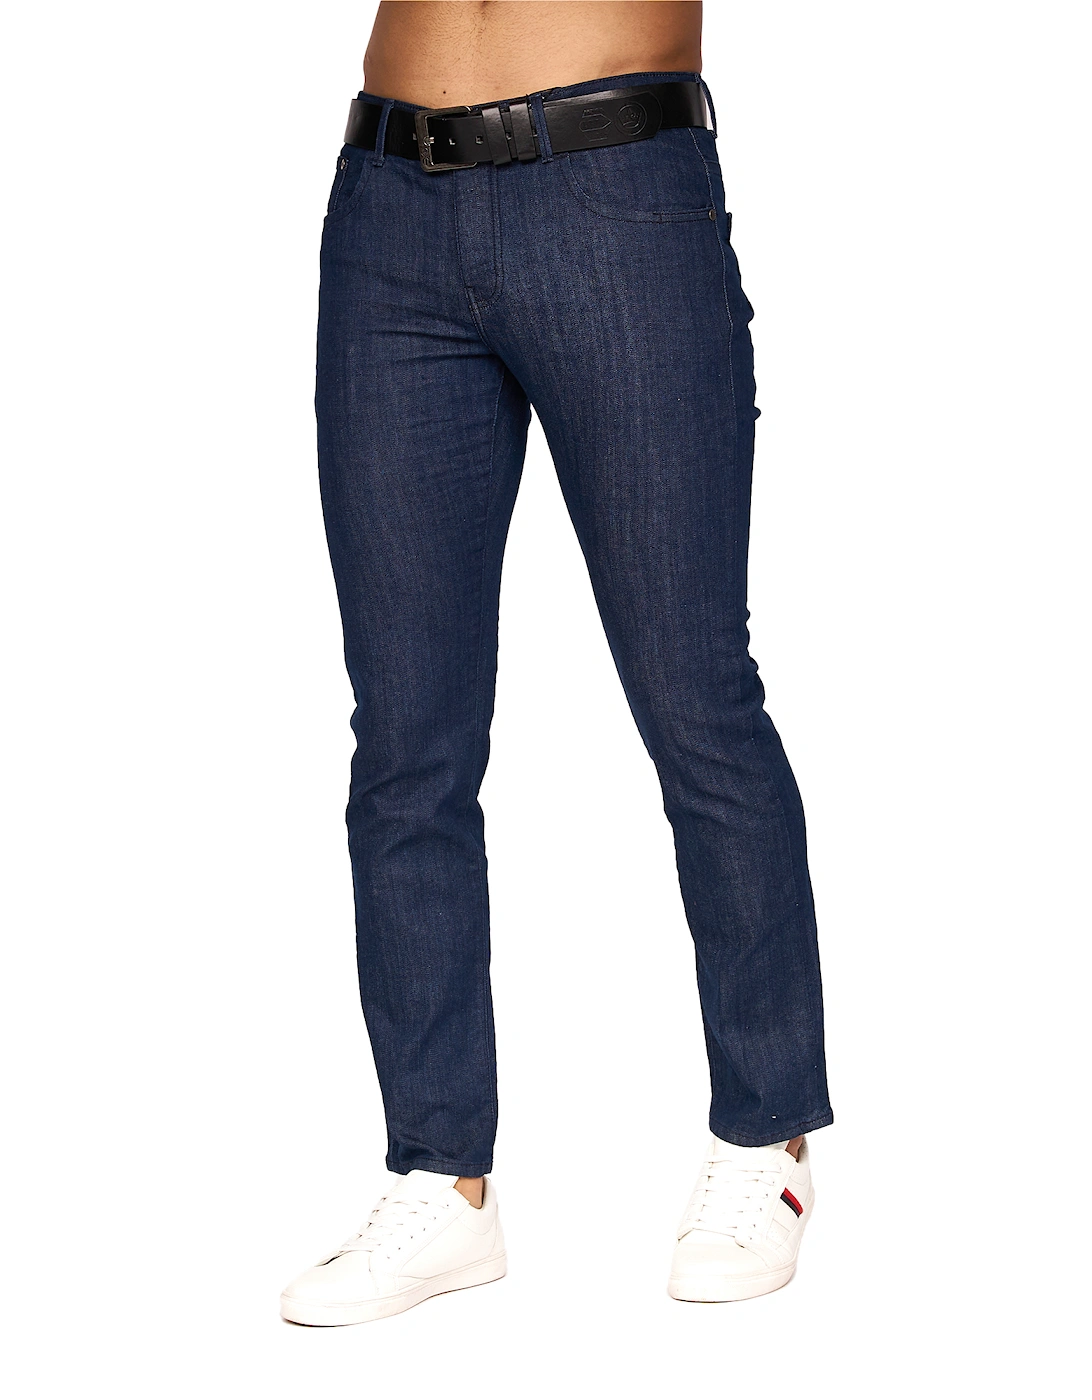 Mens Farrowed Stretch Jeans